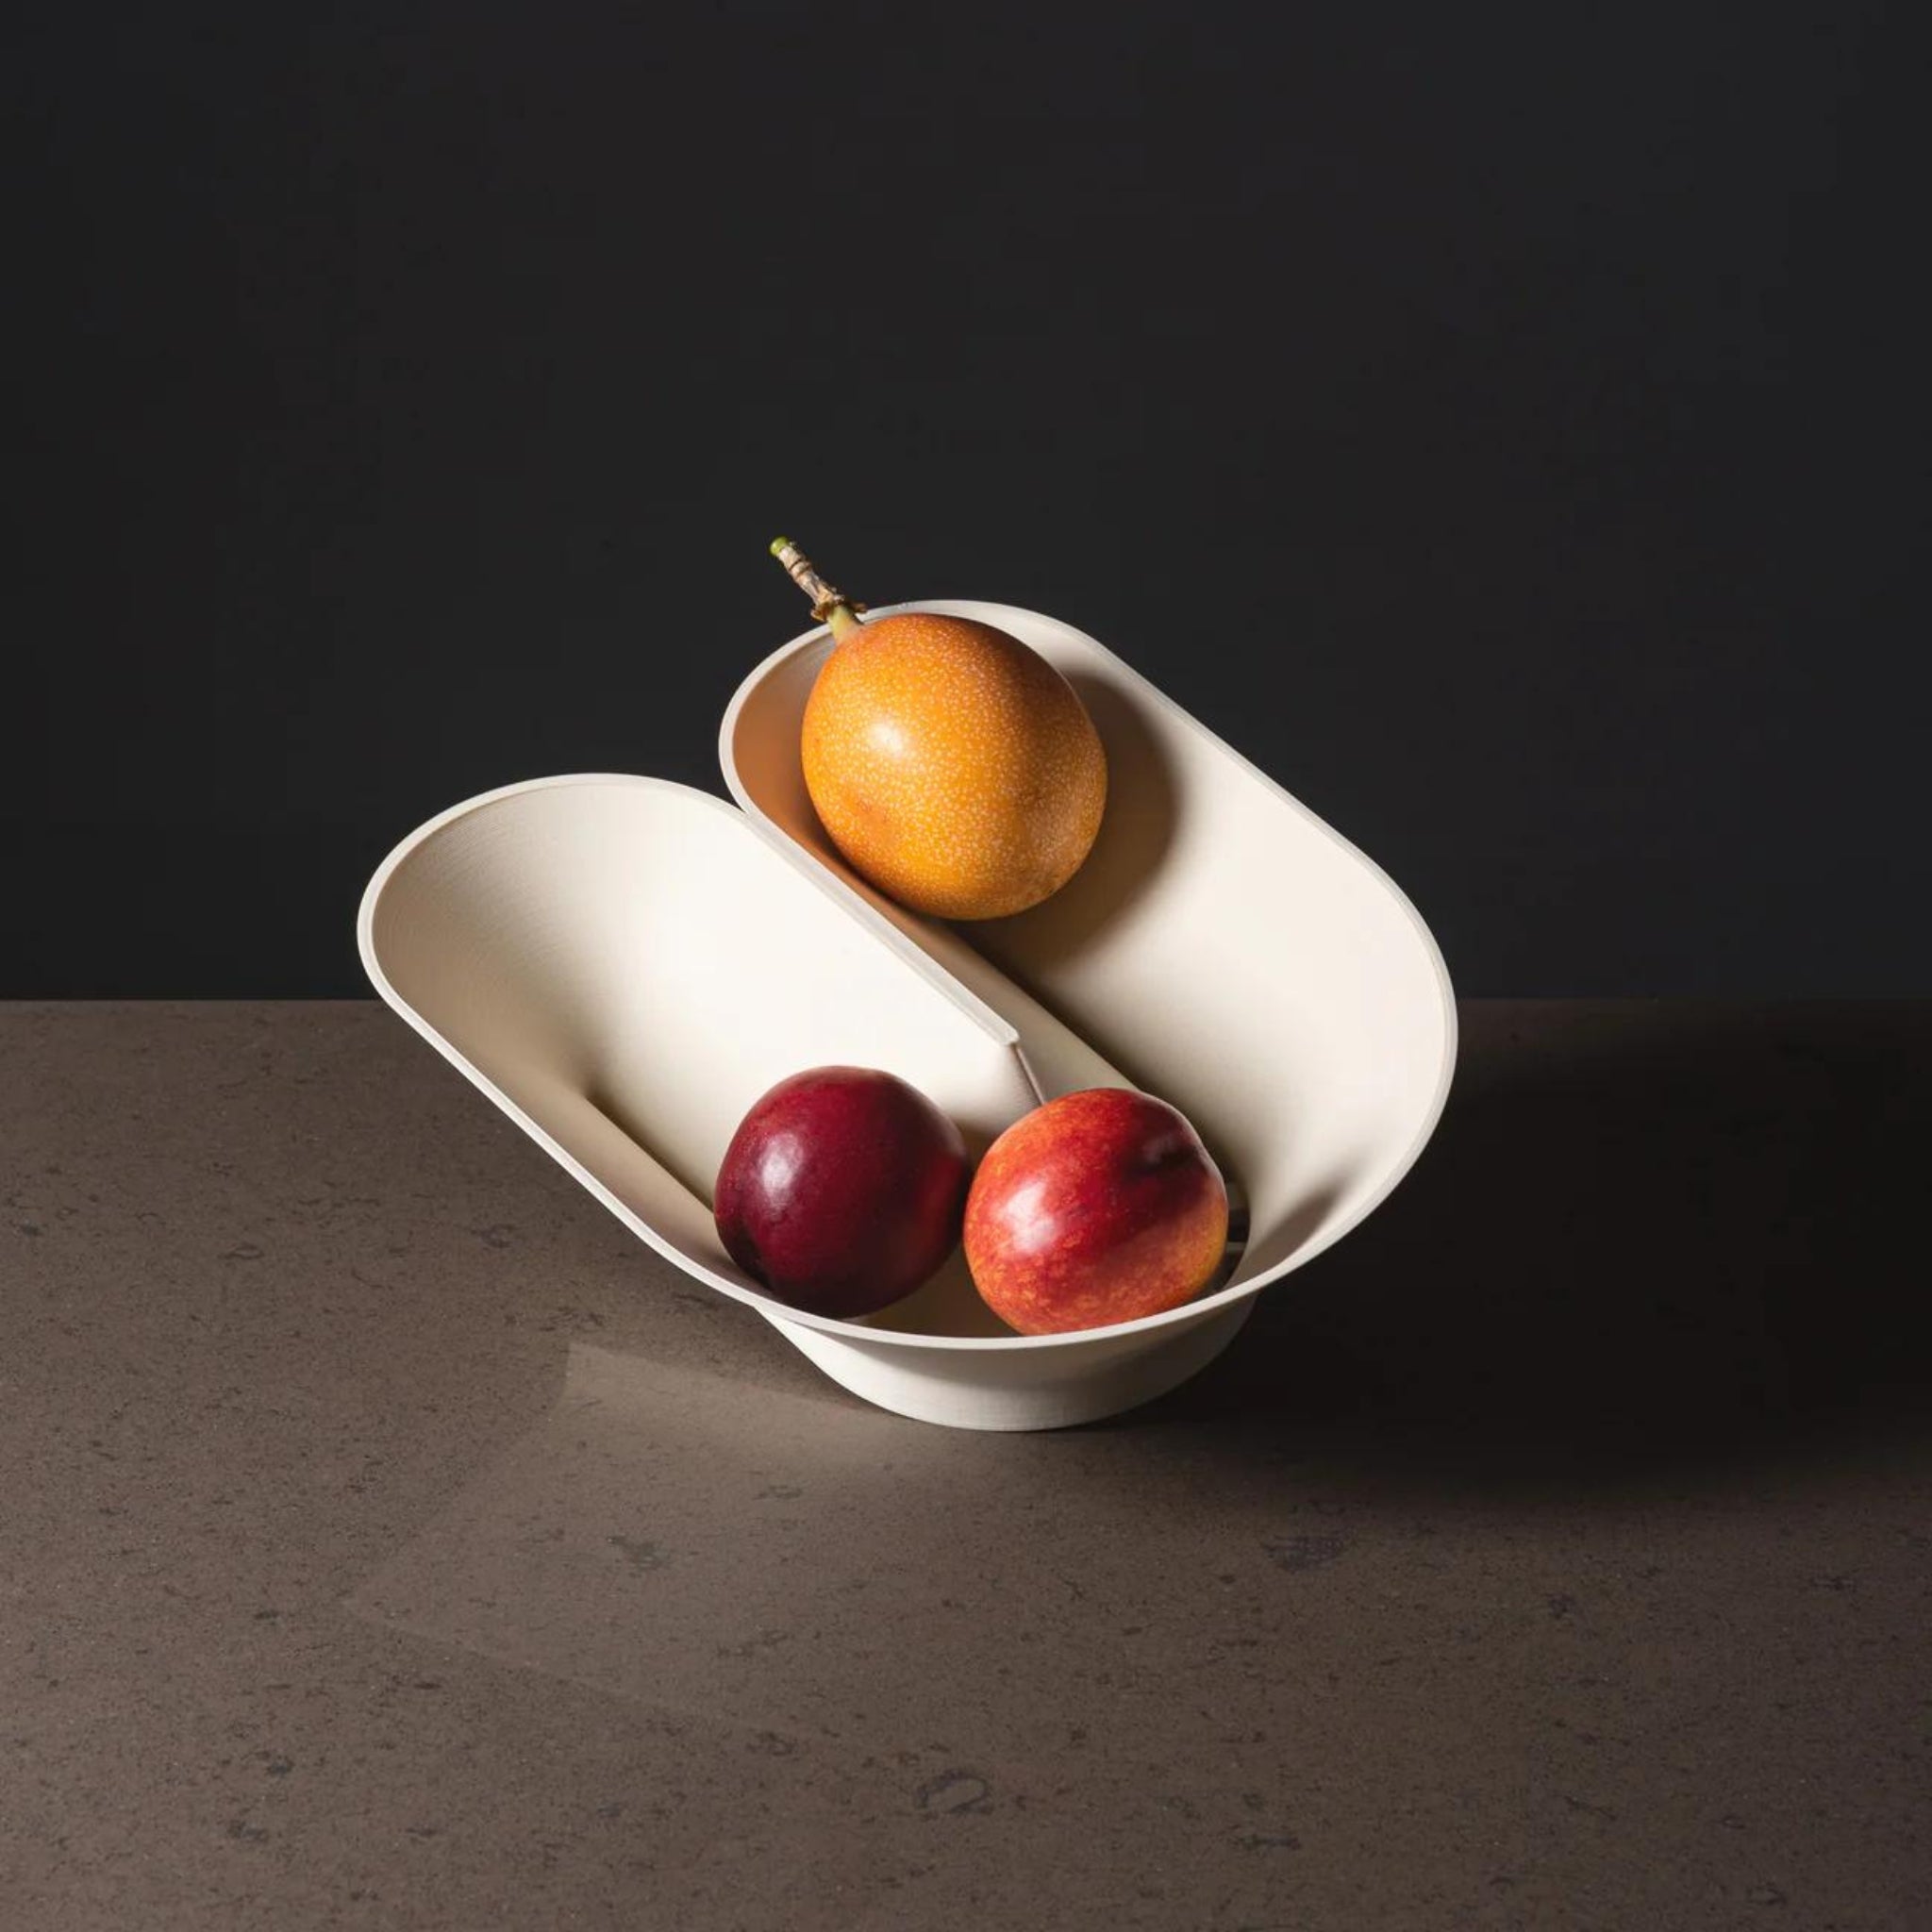 Cyrc U fruit bowl in eggshell. 3D printed recycled plastic fruit bowl holding three red fruits, resting on a granite table in front of a dark backgound.